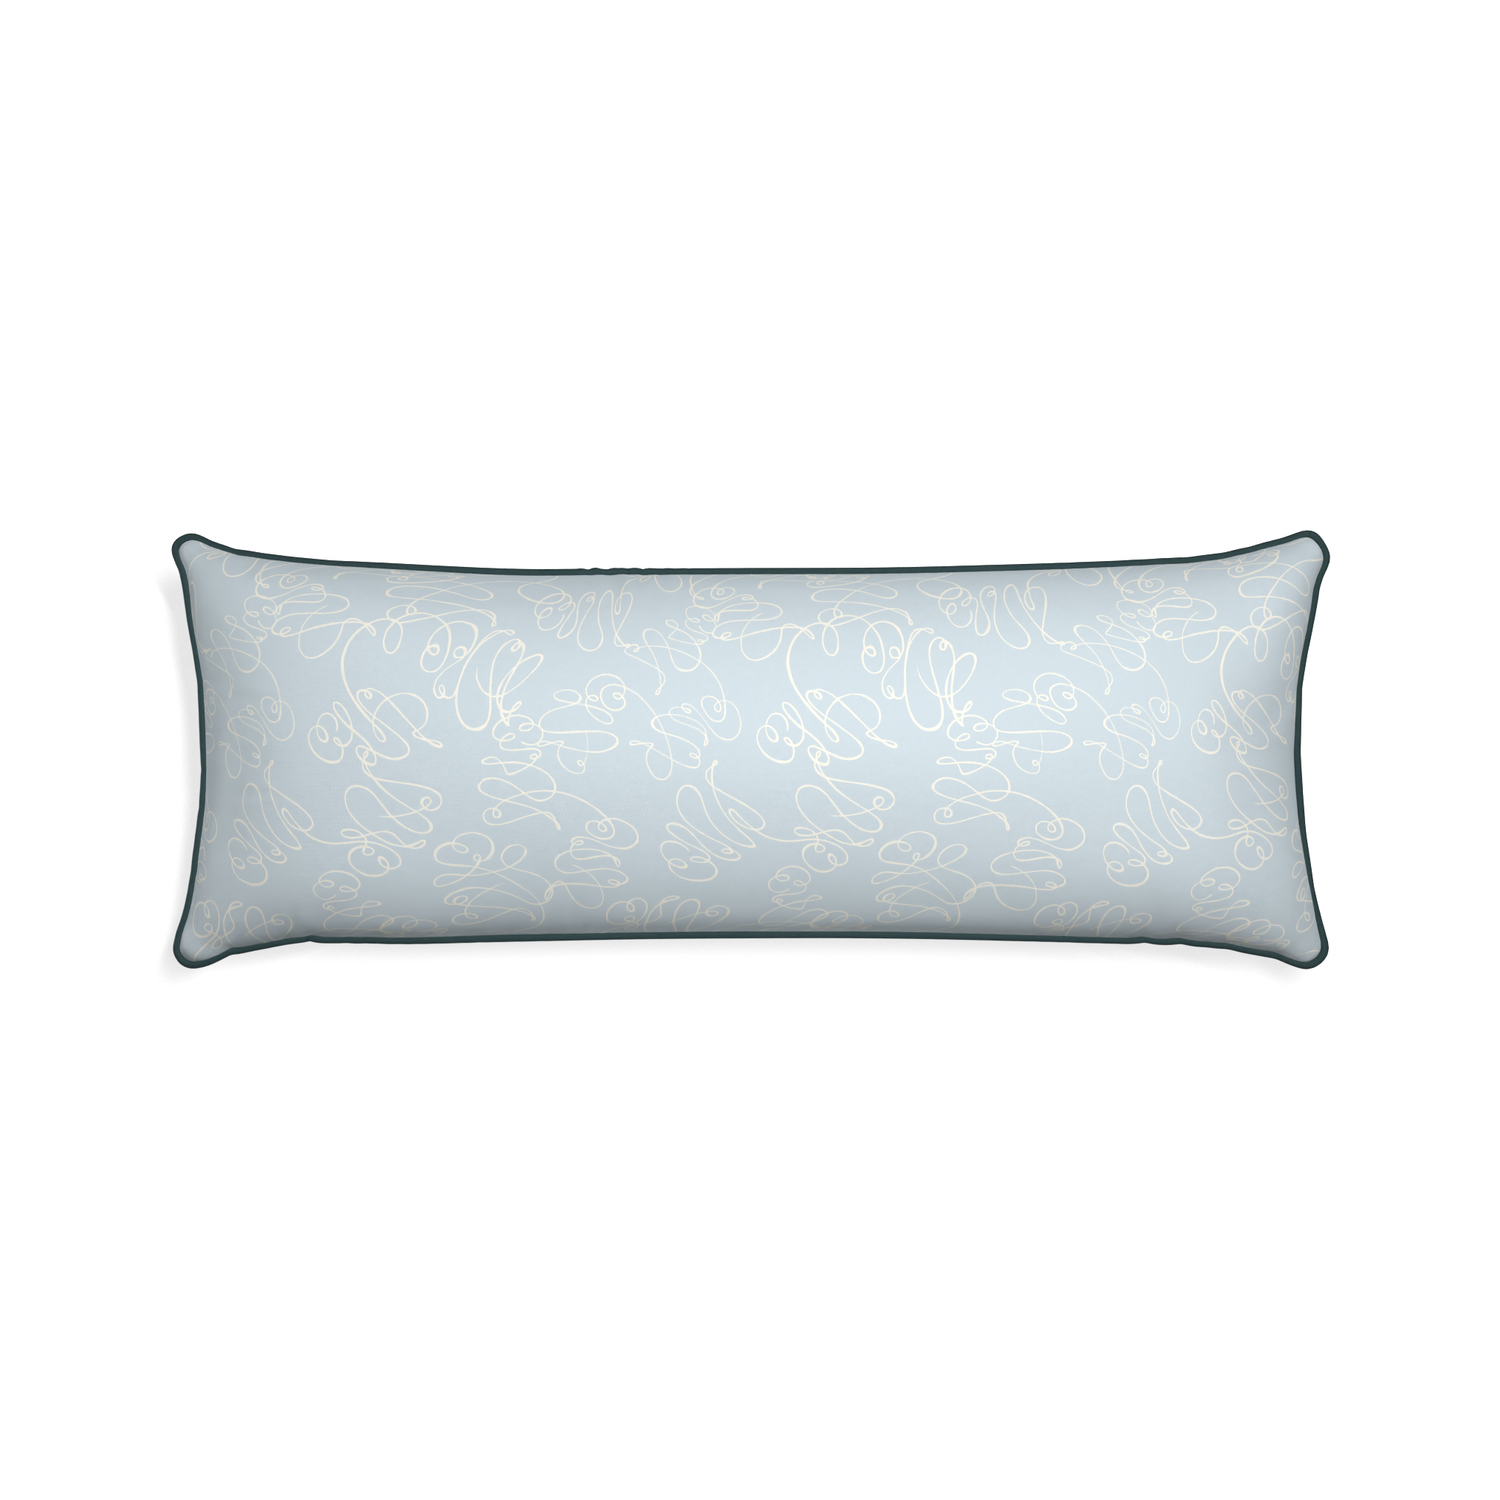 Xl-lumbar mirabella custom powder blue abstractpillow with p piping on white background